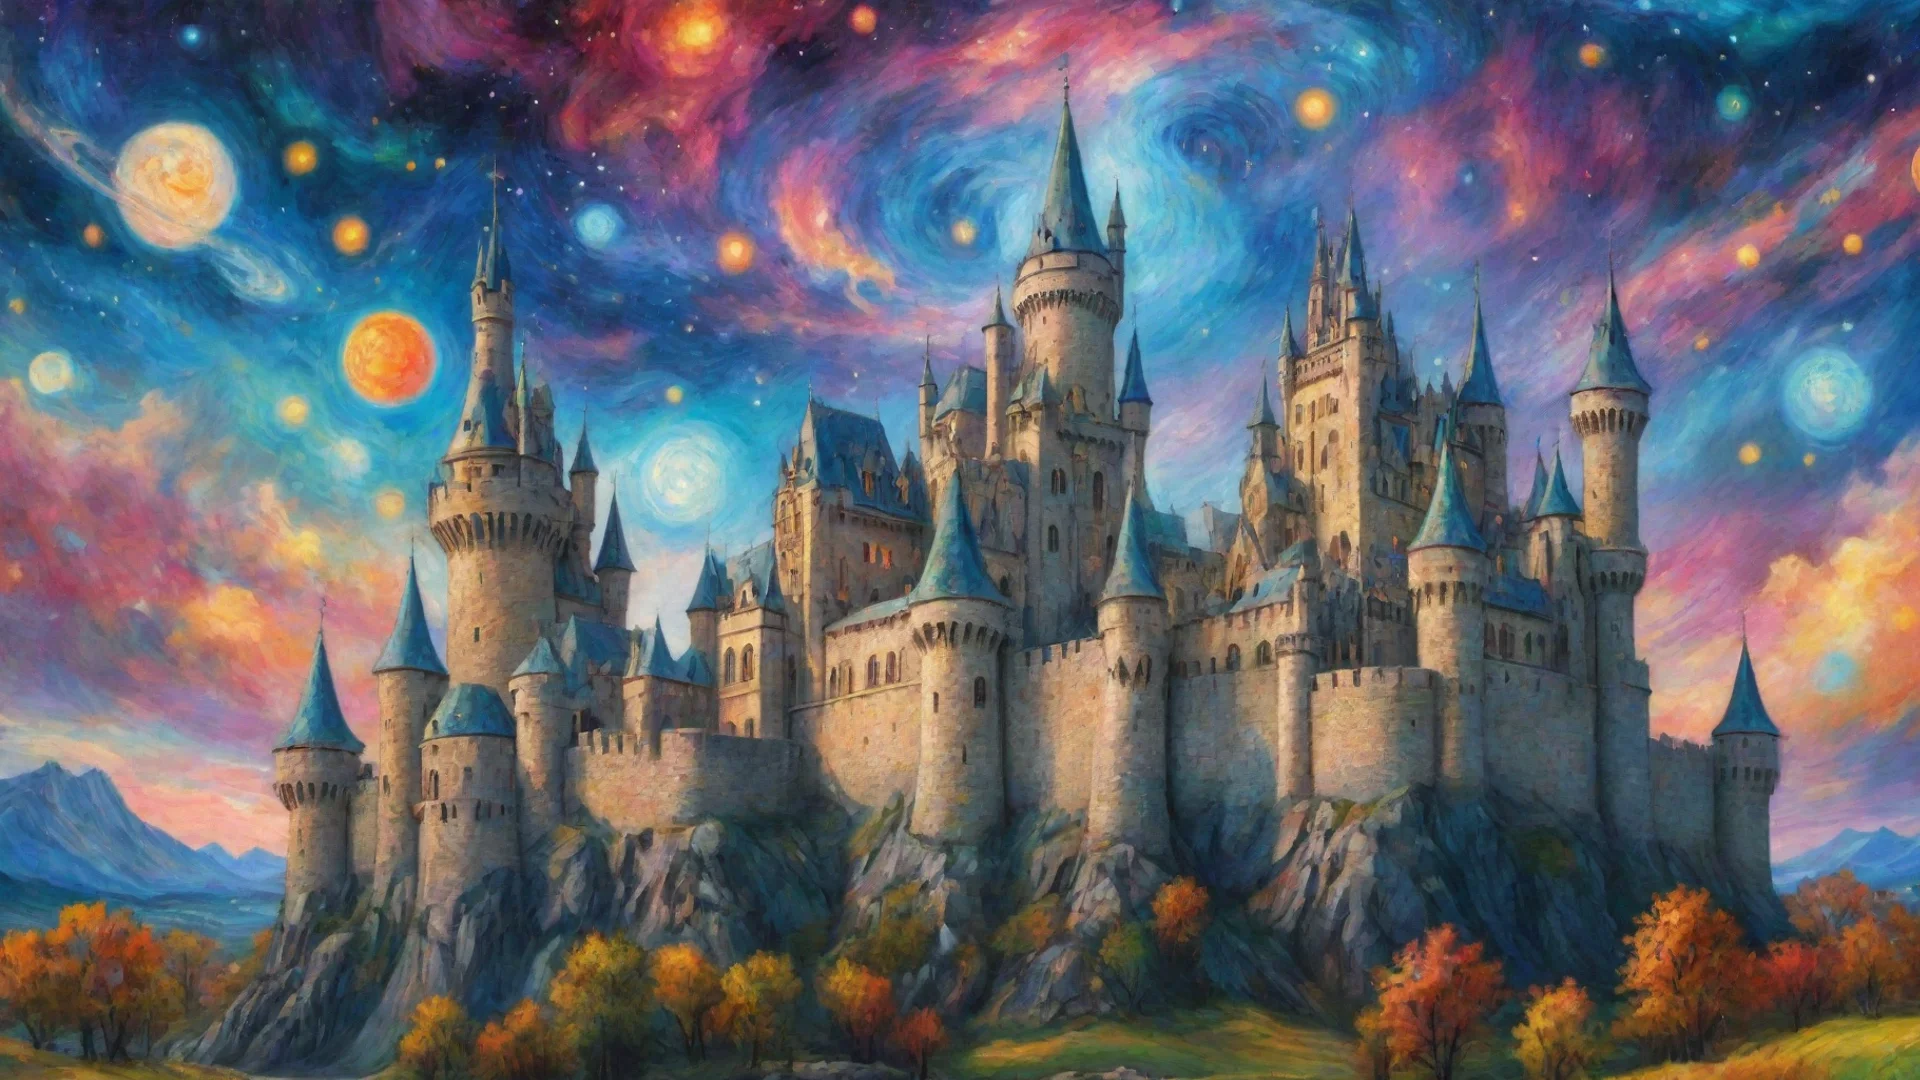 aitrending epic castle with colorful artistic sky planets van gogh style detailed hd asthetic castle good looking fantastic 1 wide